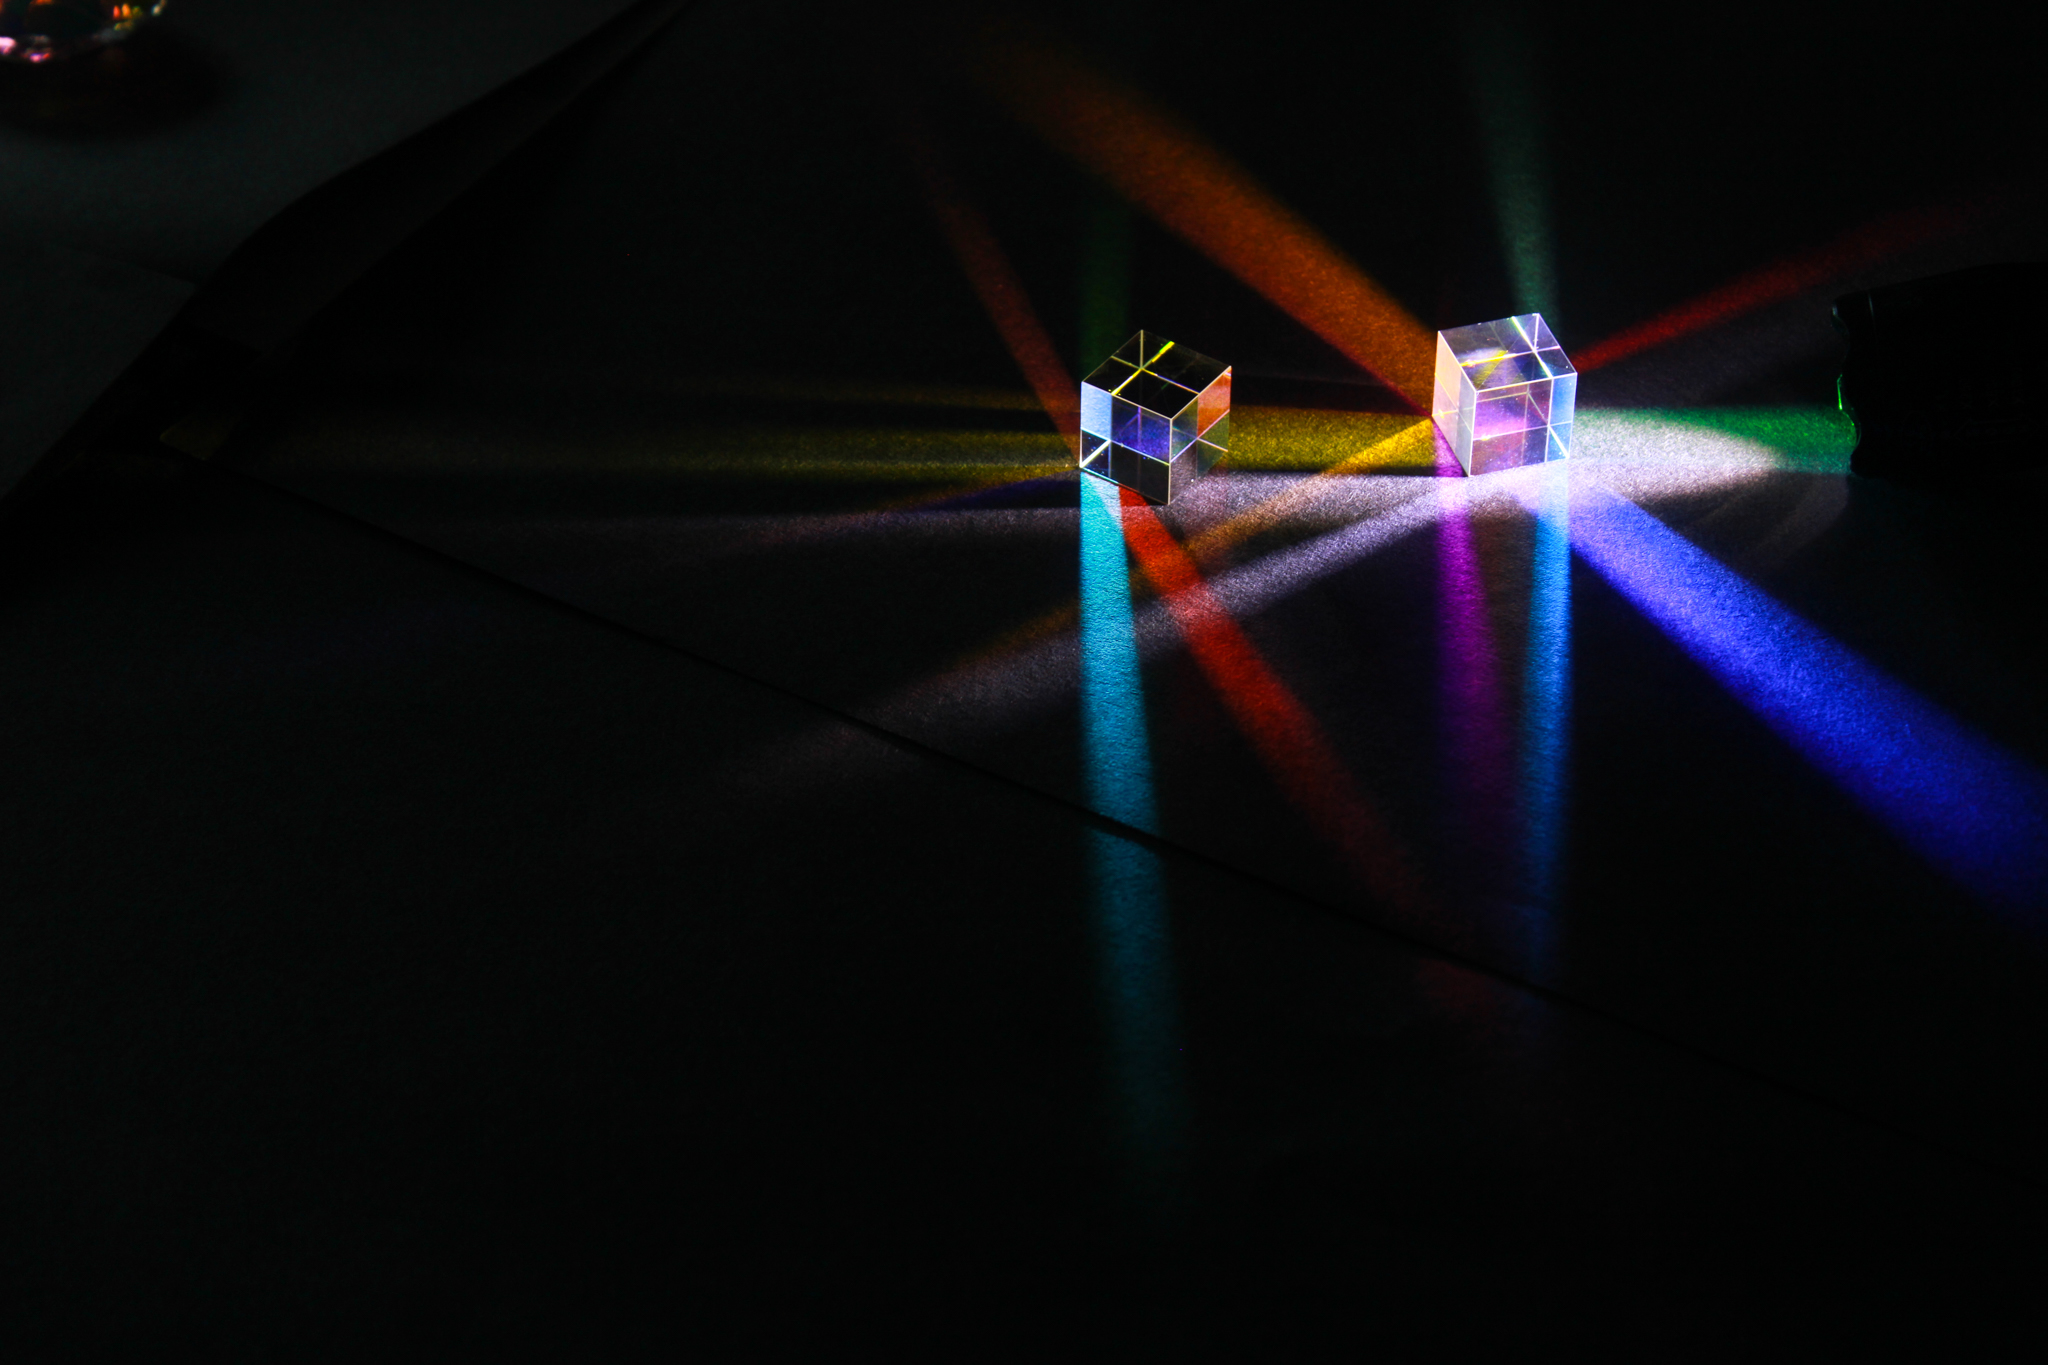 Photograph taken by students showcasing different light patterns through dichroic cubes and prisms